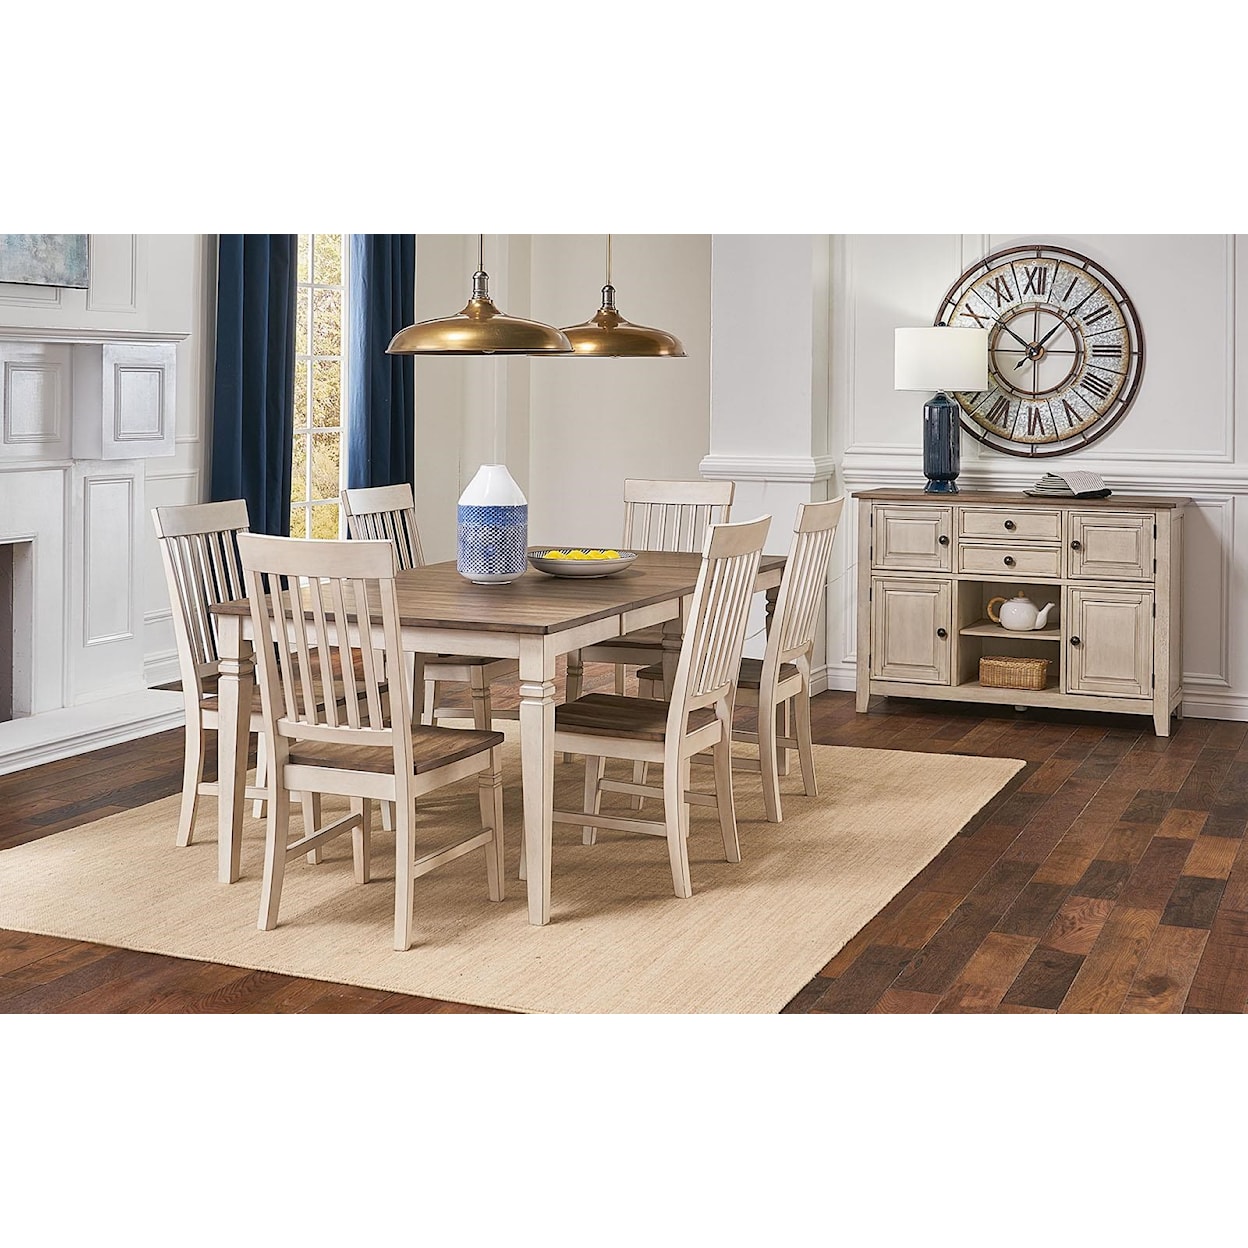 AAmerica Beacon Dining Table and 6 Chair Set